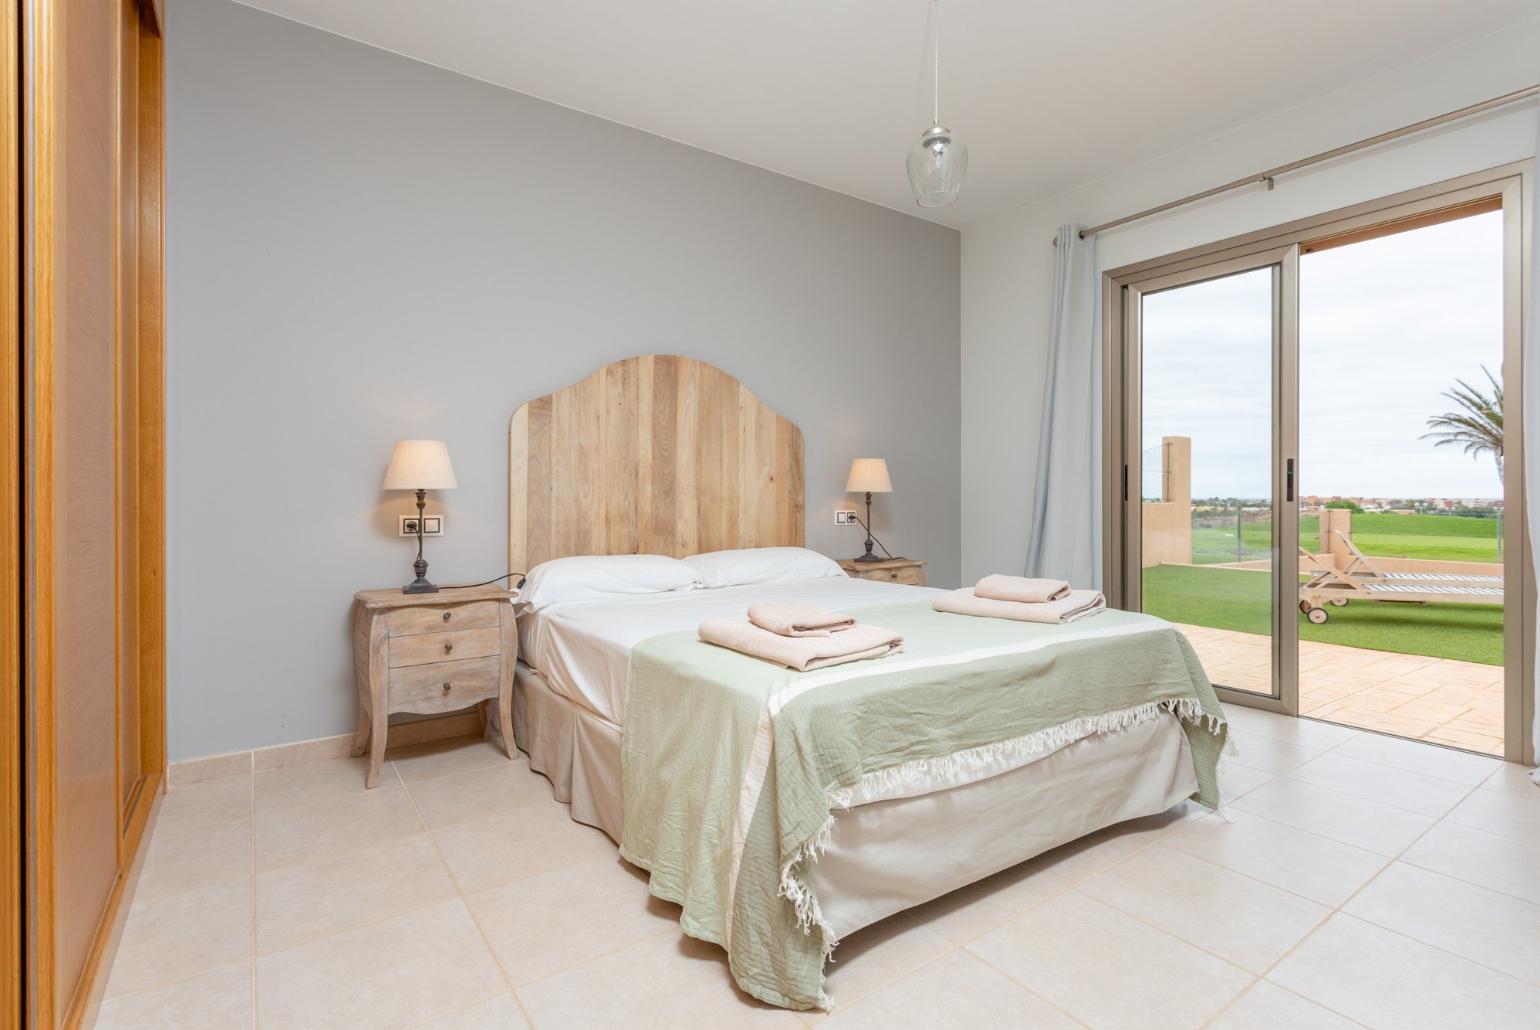 Double bedroom with en suite bathroom and pool terrace access